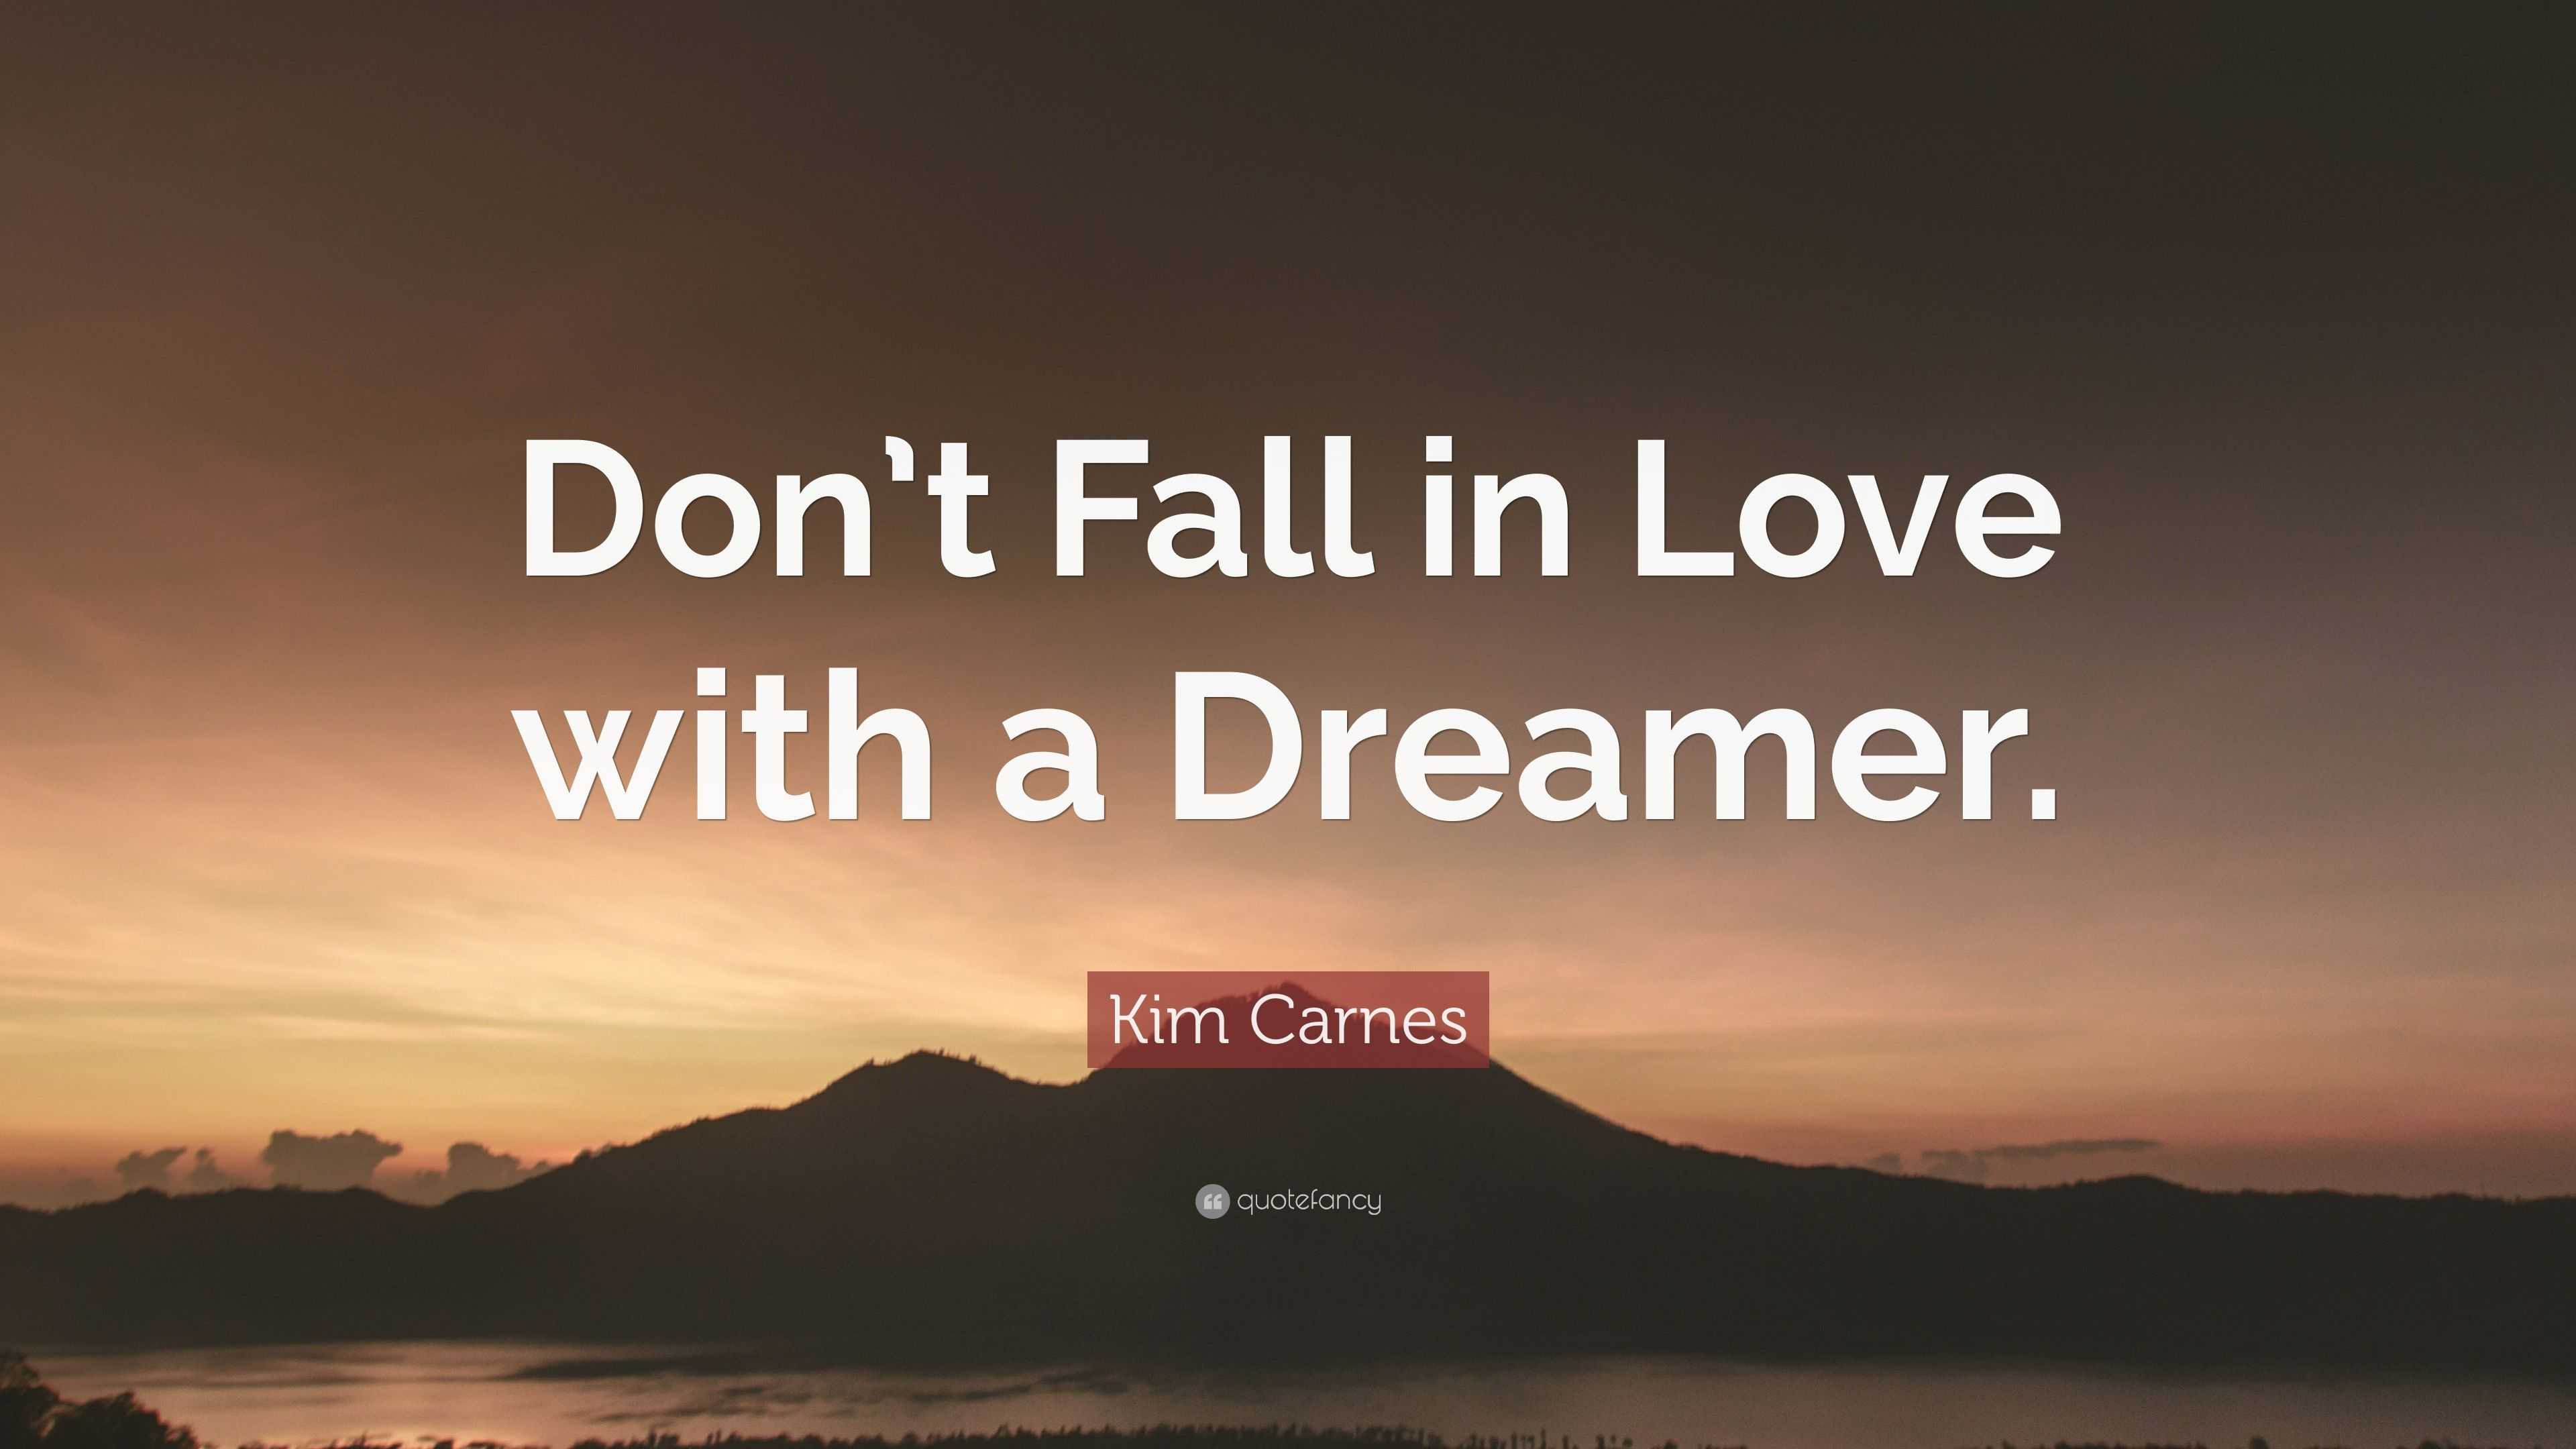 Dont fall. Quotes about don't Love. Quotes about Dreams. ~Don't Fall in Love with me~ перевод на русский.